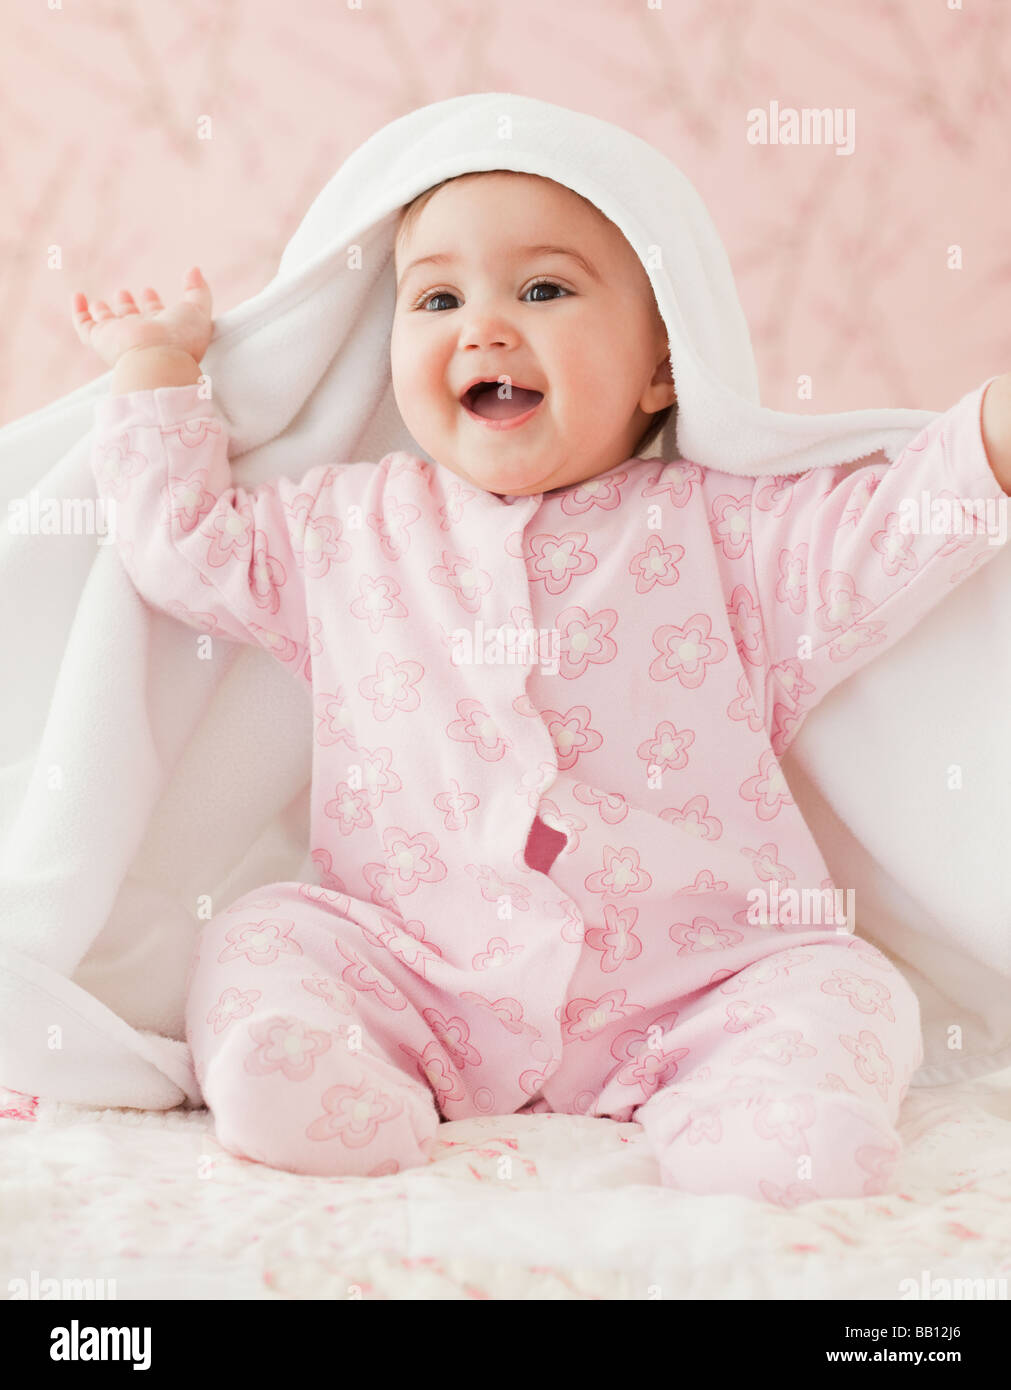 Mixed race baby girl playing peek-a-boo under blanket Stock Photo